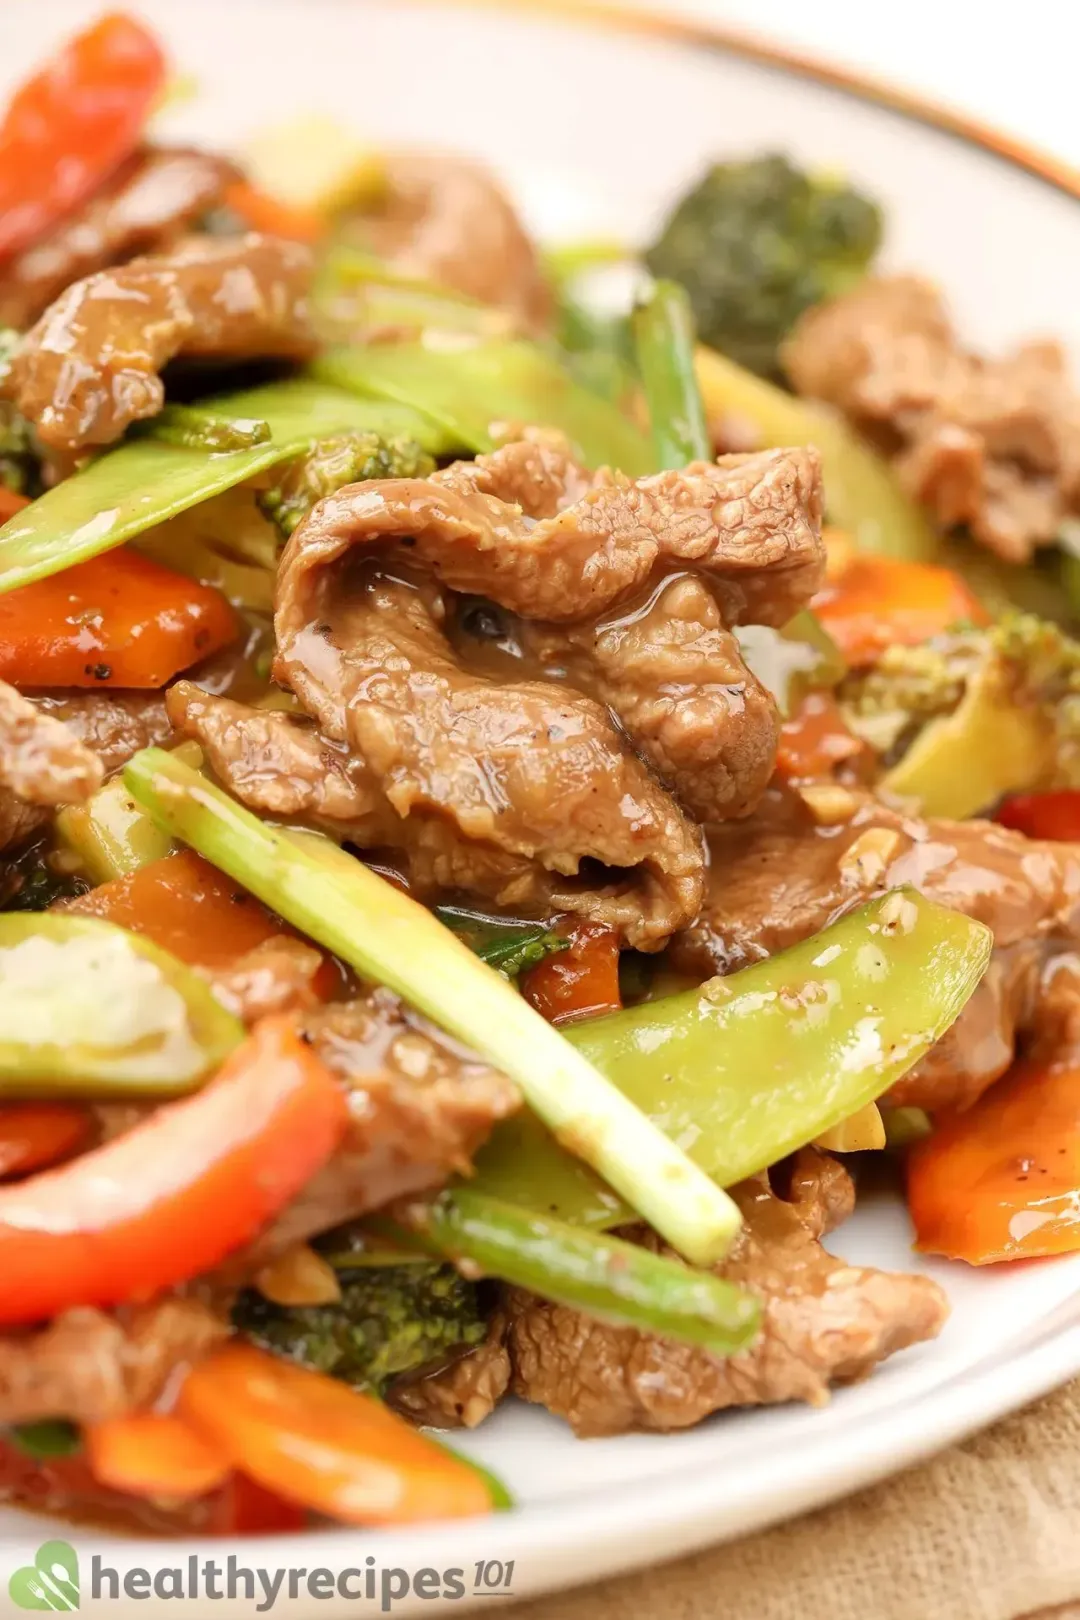 Tips for Making Perfect Beef Stir Fry